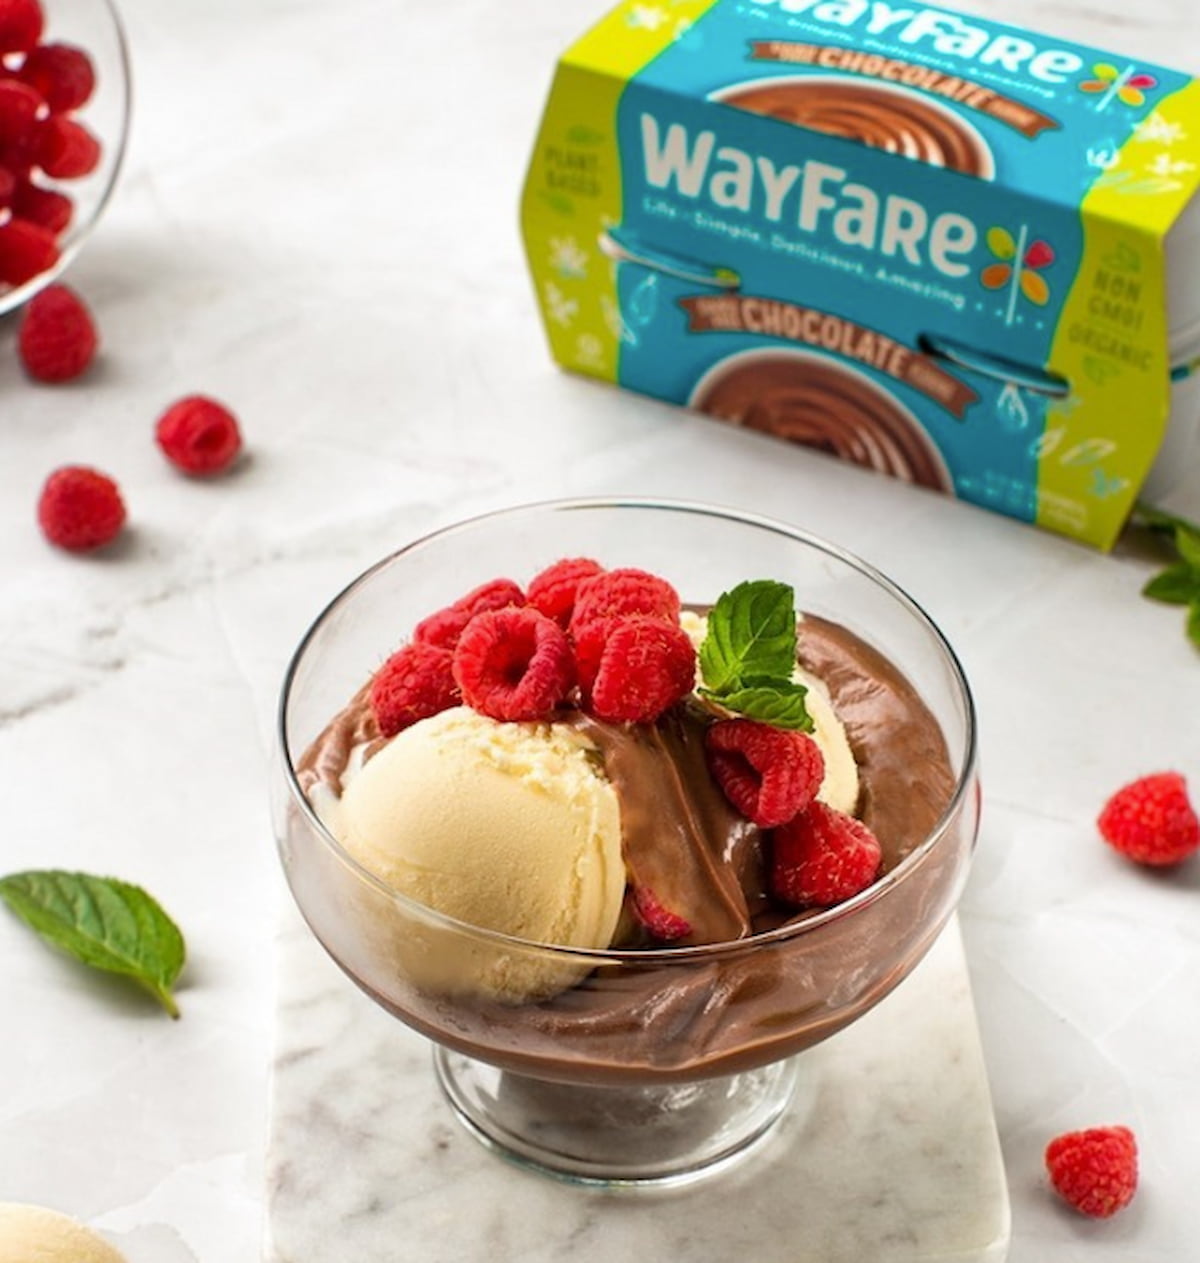 A bowl of WayFare vegan chocolate pudding topped with a scoop of vegan ice cream and raspberries.